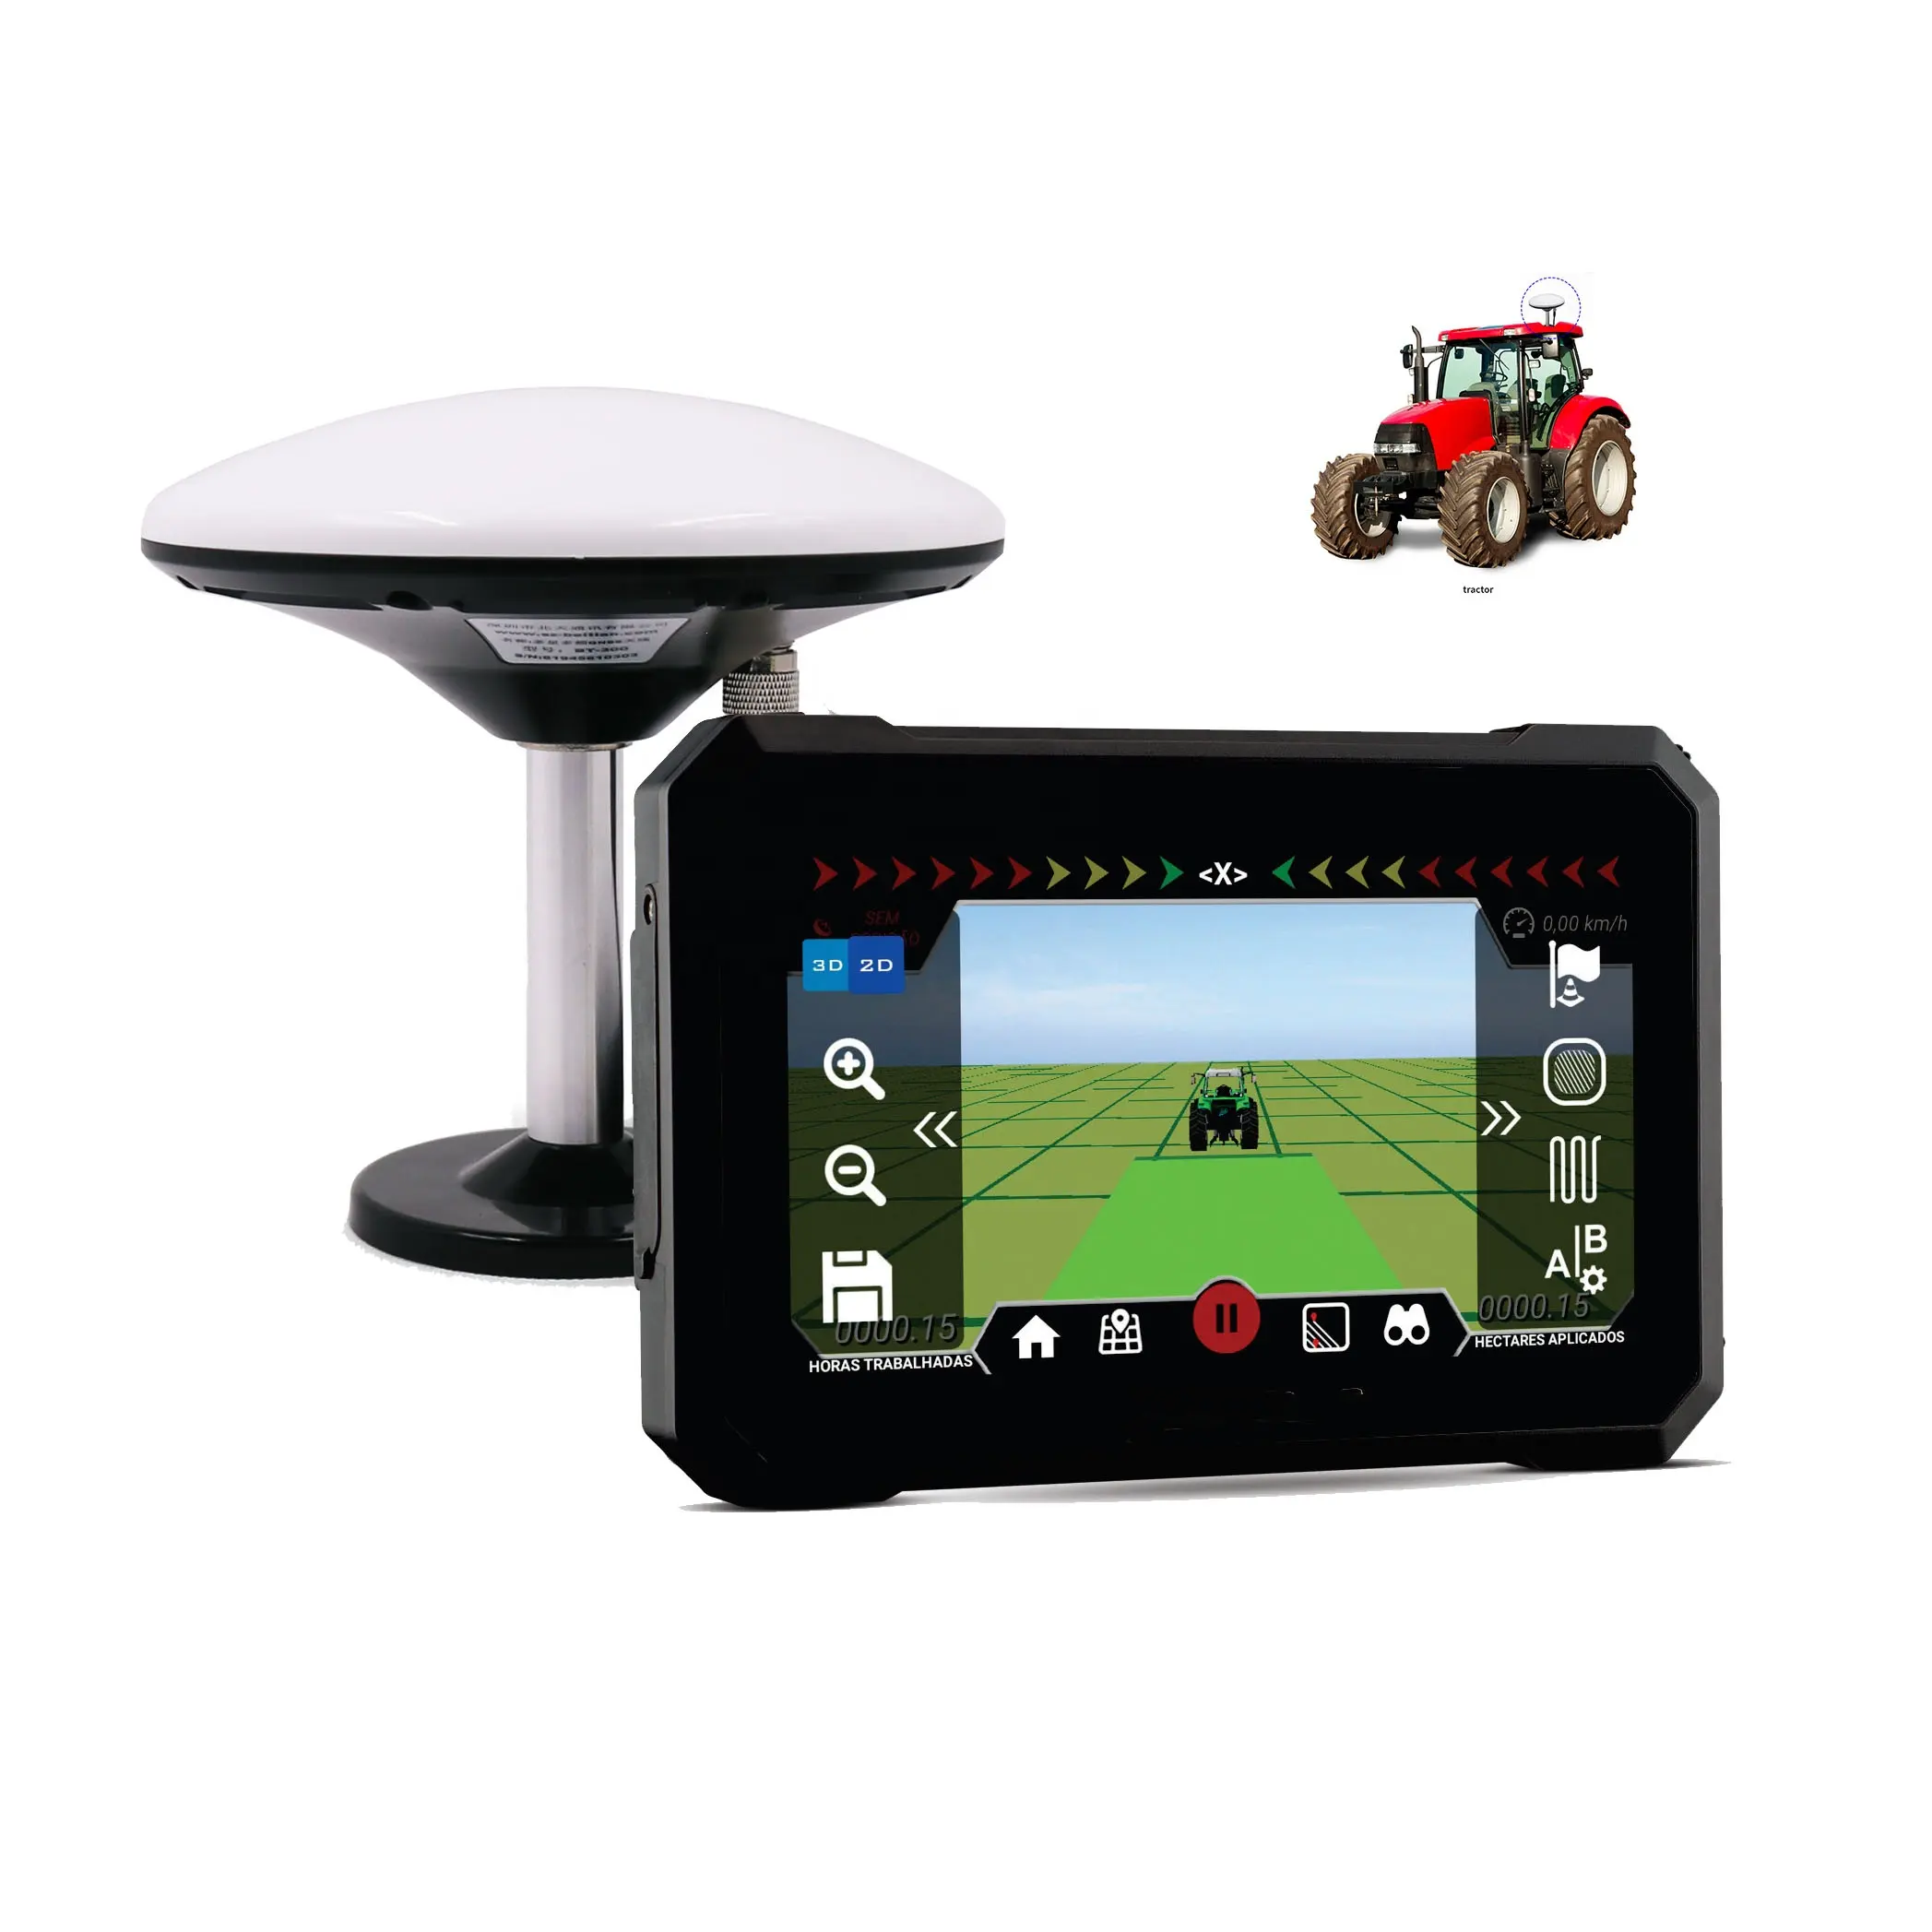 Ruihao 15cm Accuracy IP65 Rugged 7" Android GPS Tractor Navigation for Agriculture